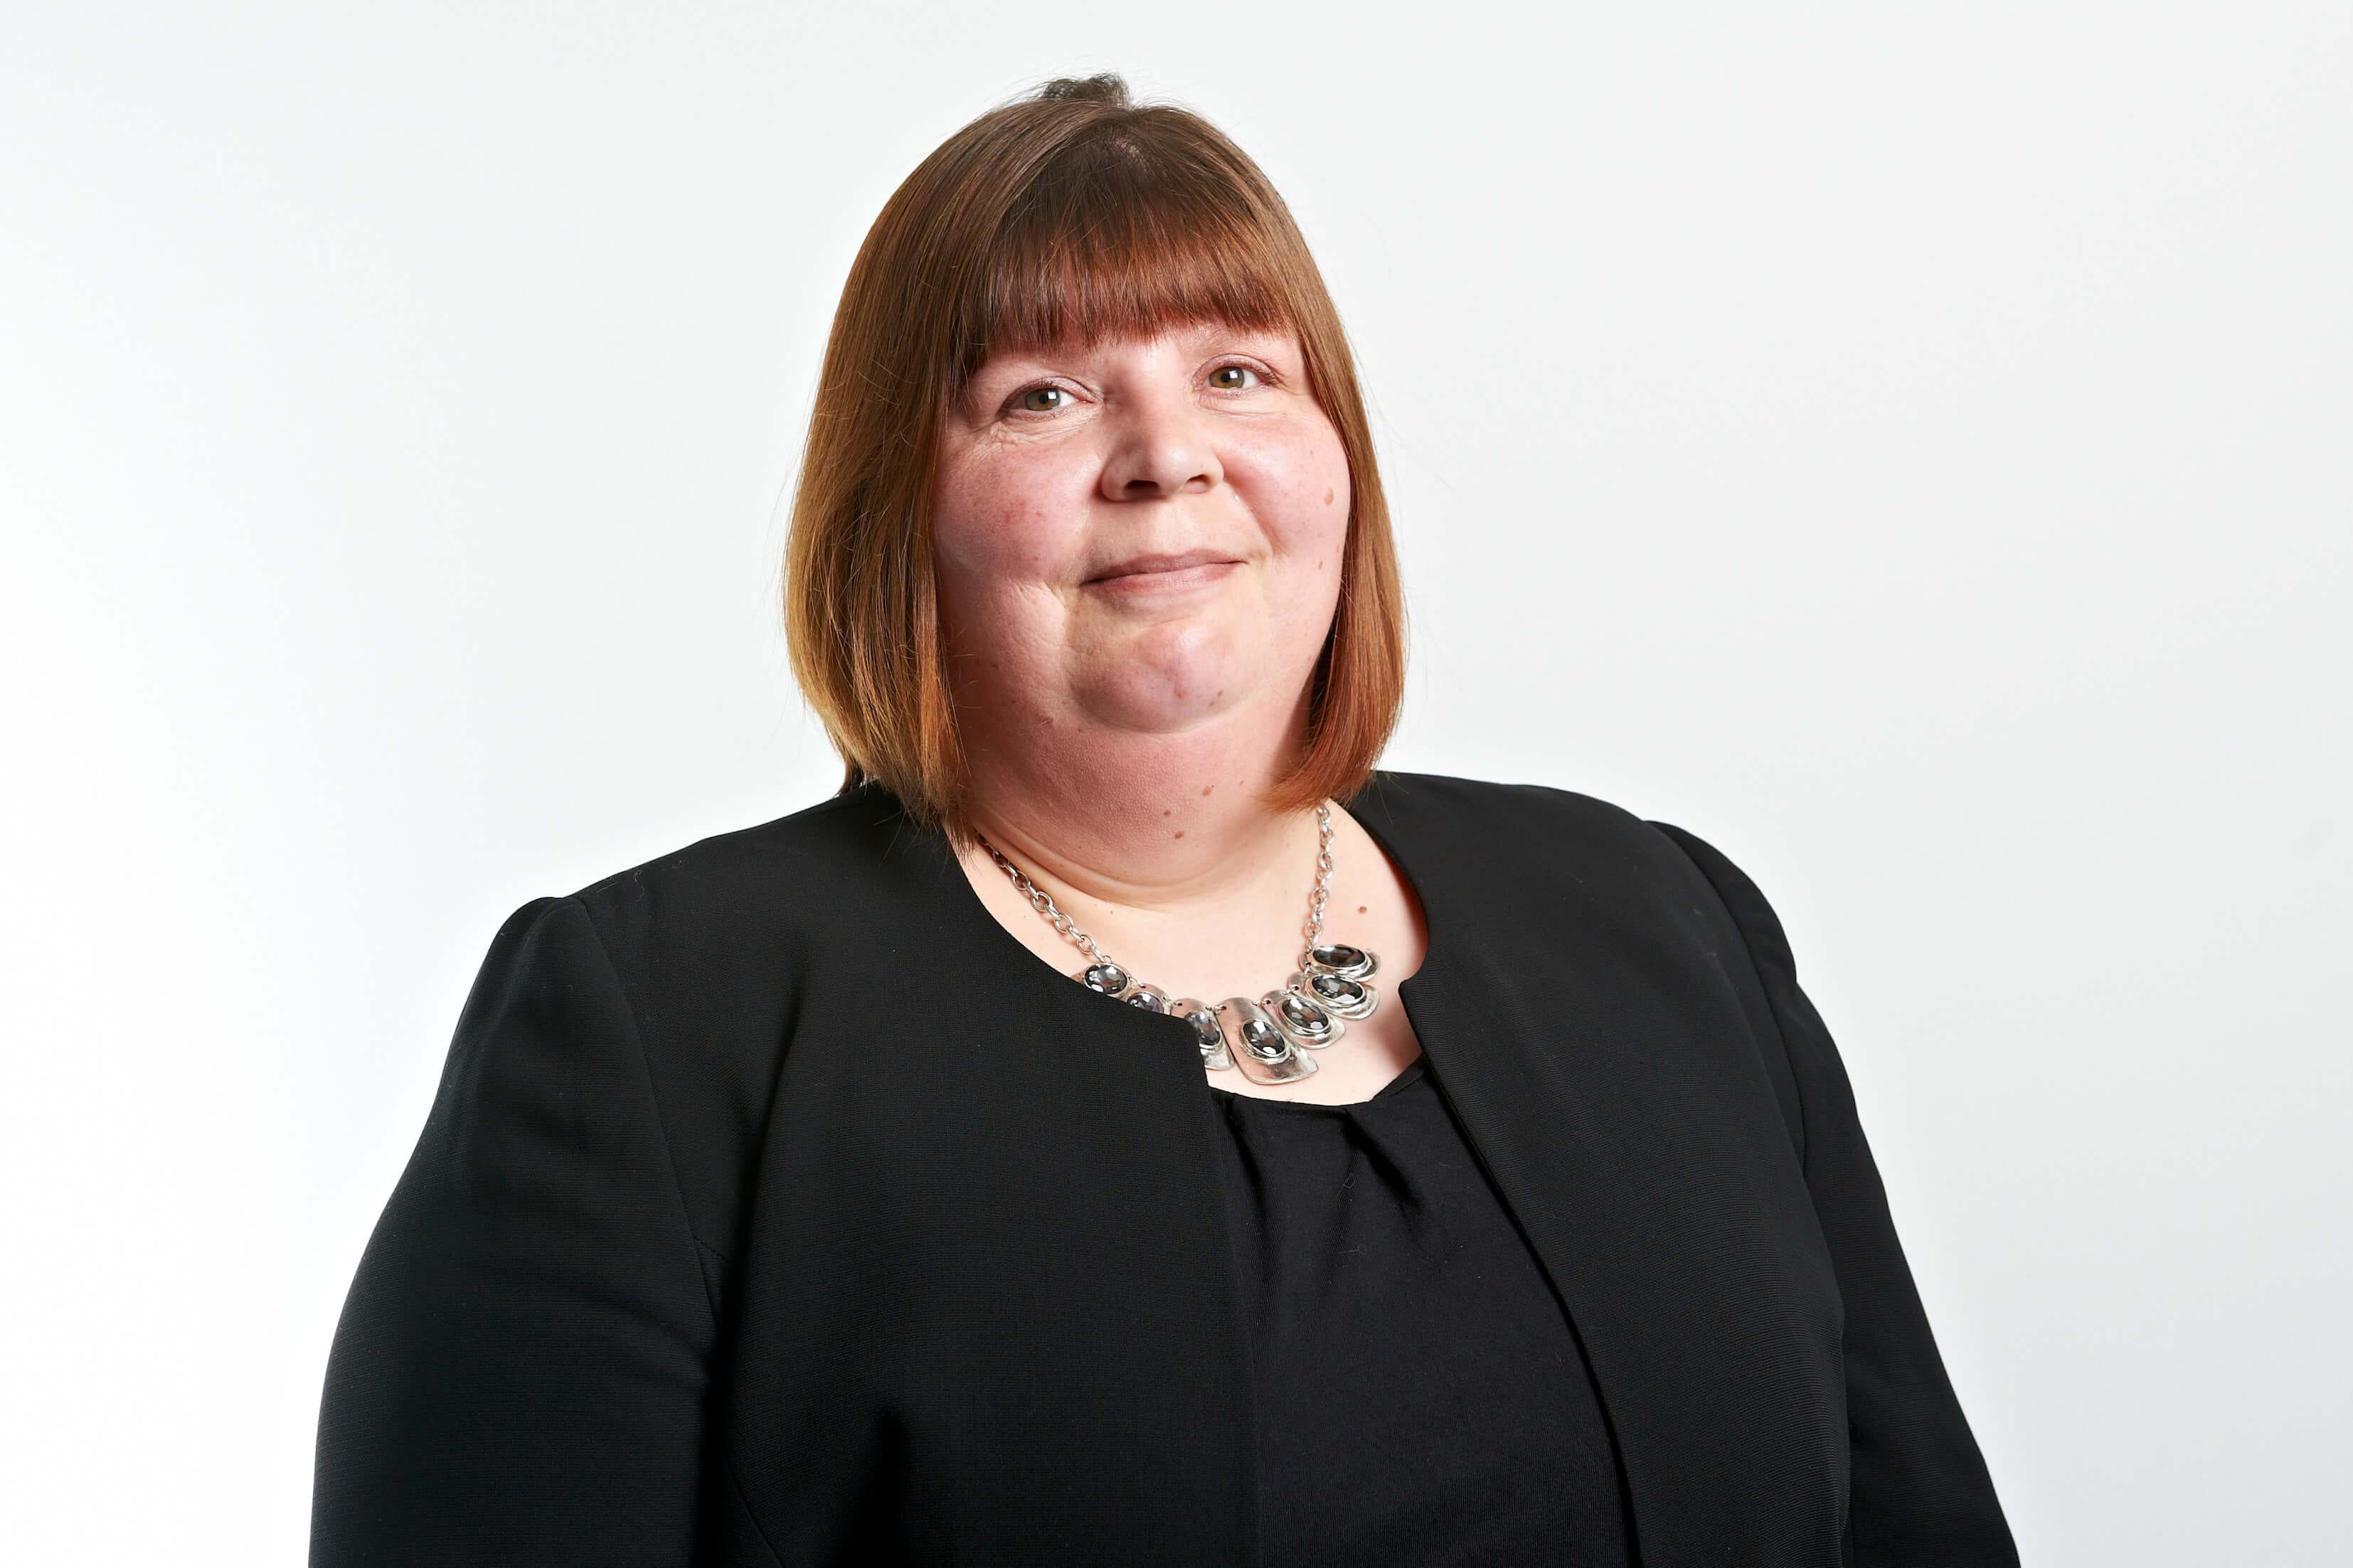 A profile of Charlotte Moore, a senior supervisor to the Thompsons Solicitors employment rights team in London.